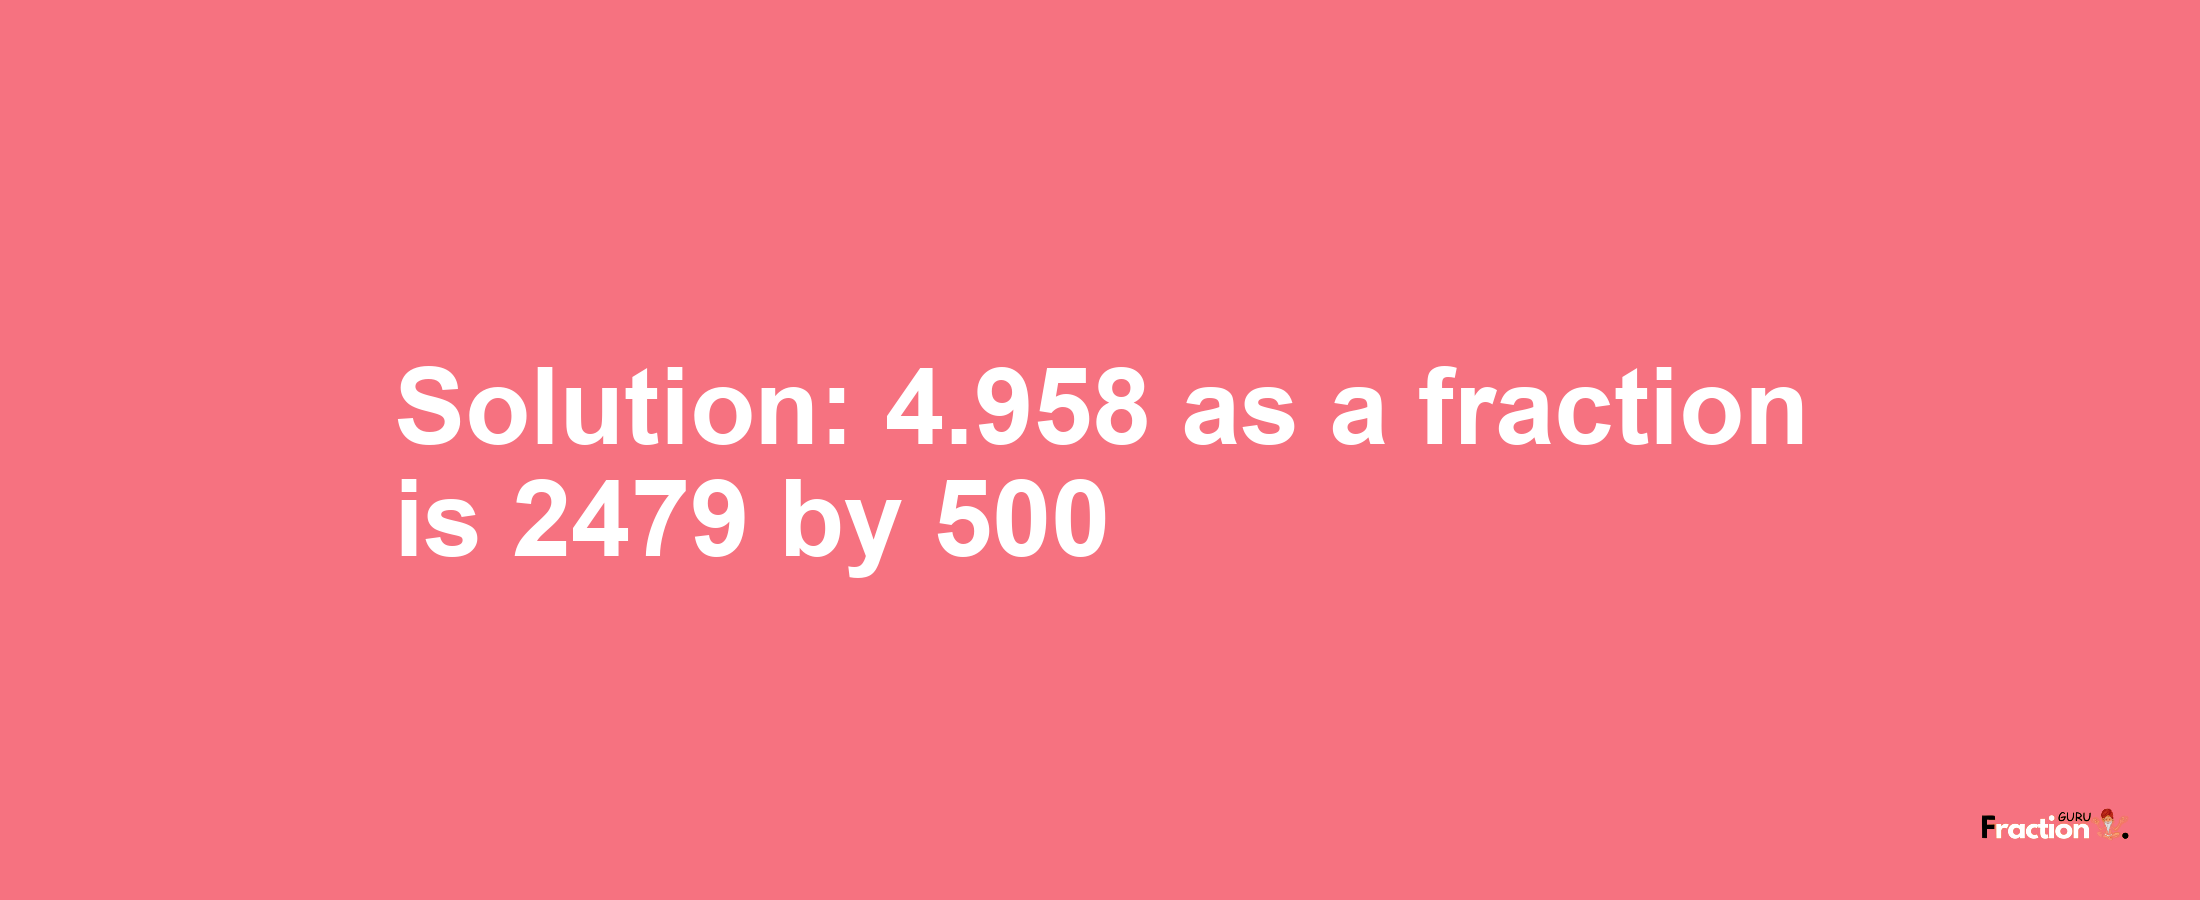 Solution:4.958 as a fraction is 2479/500